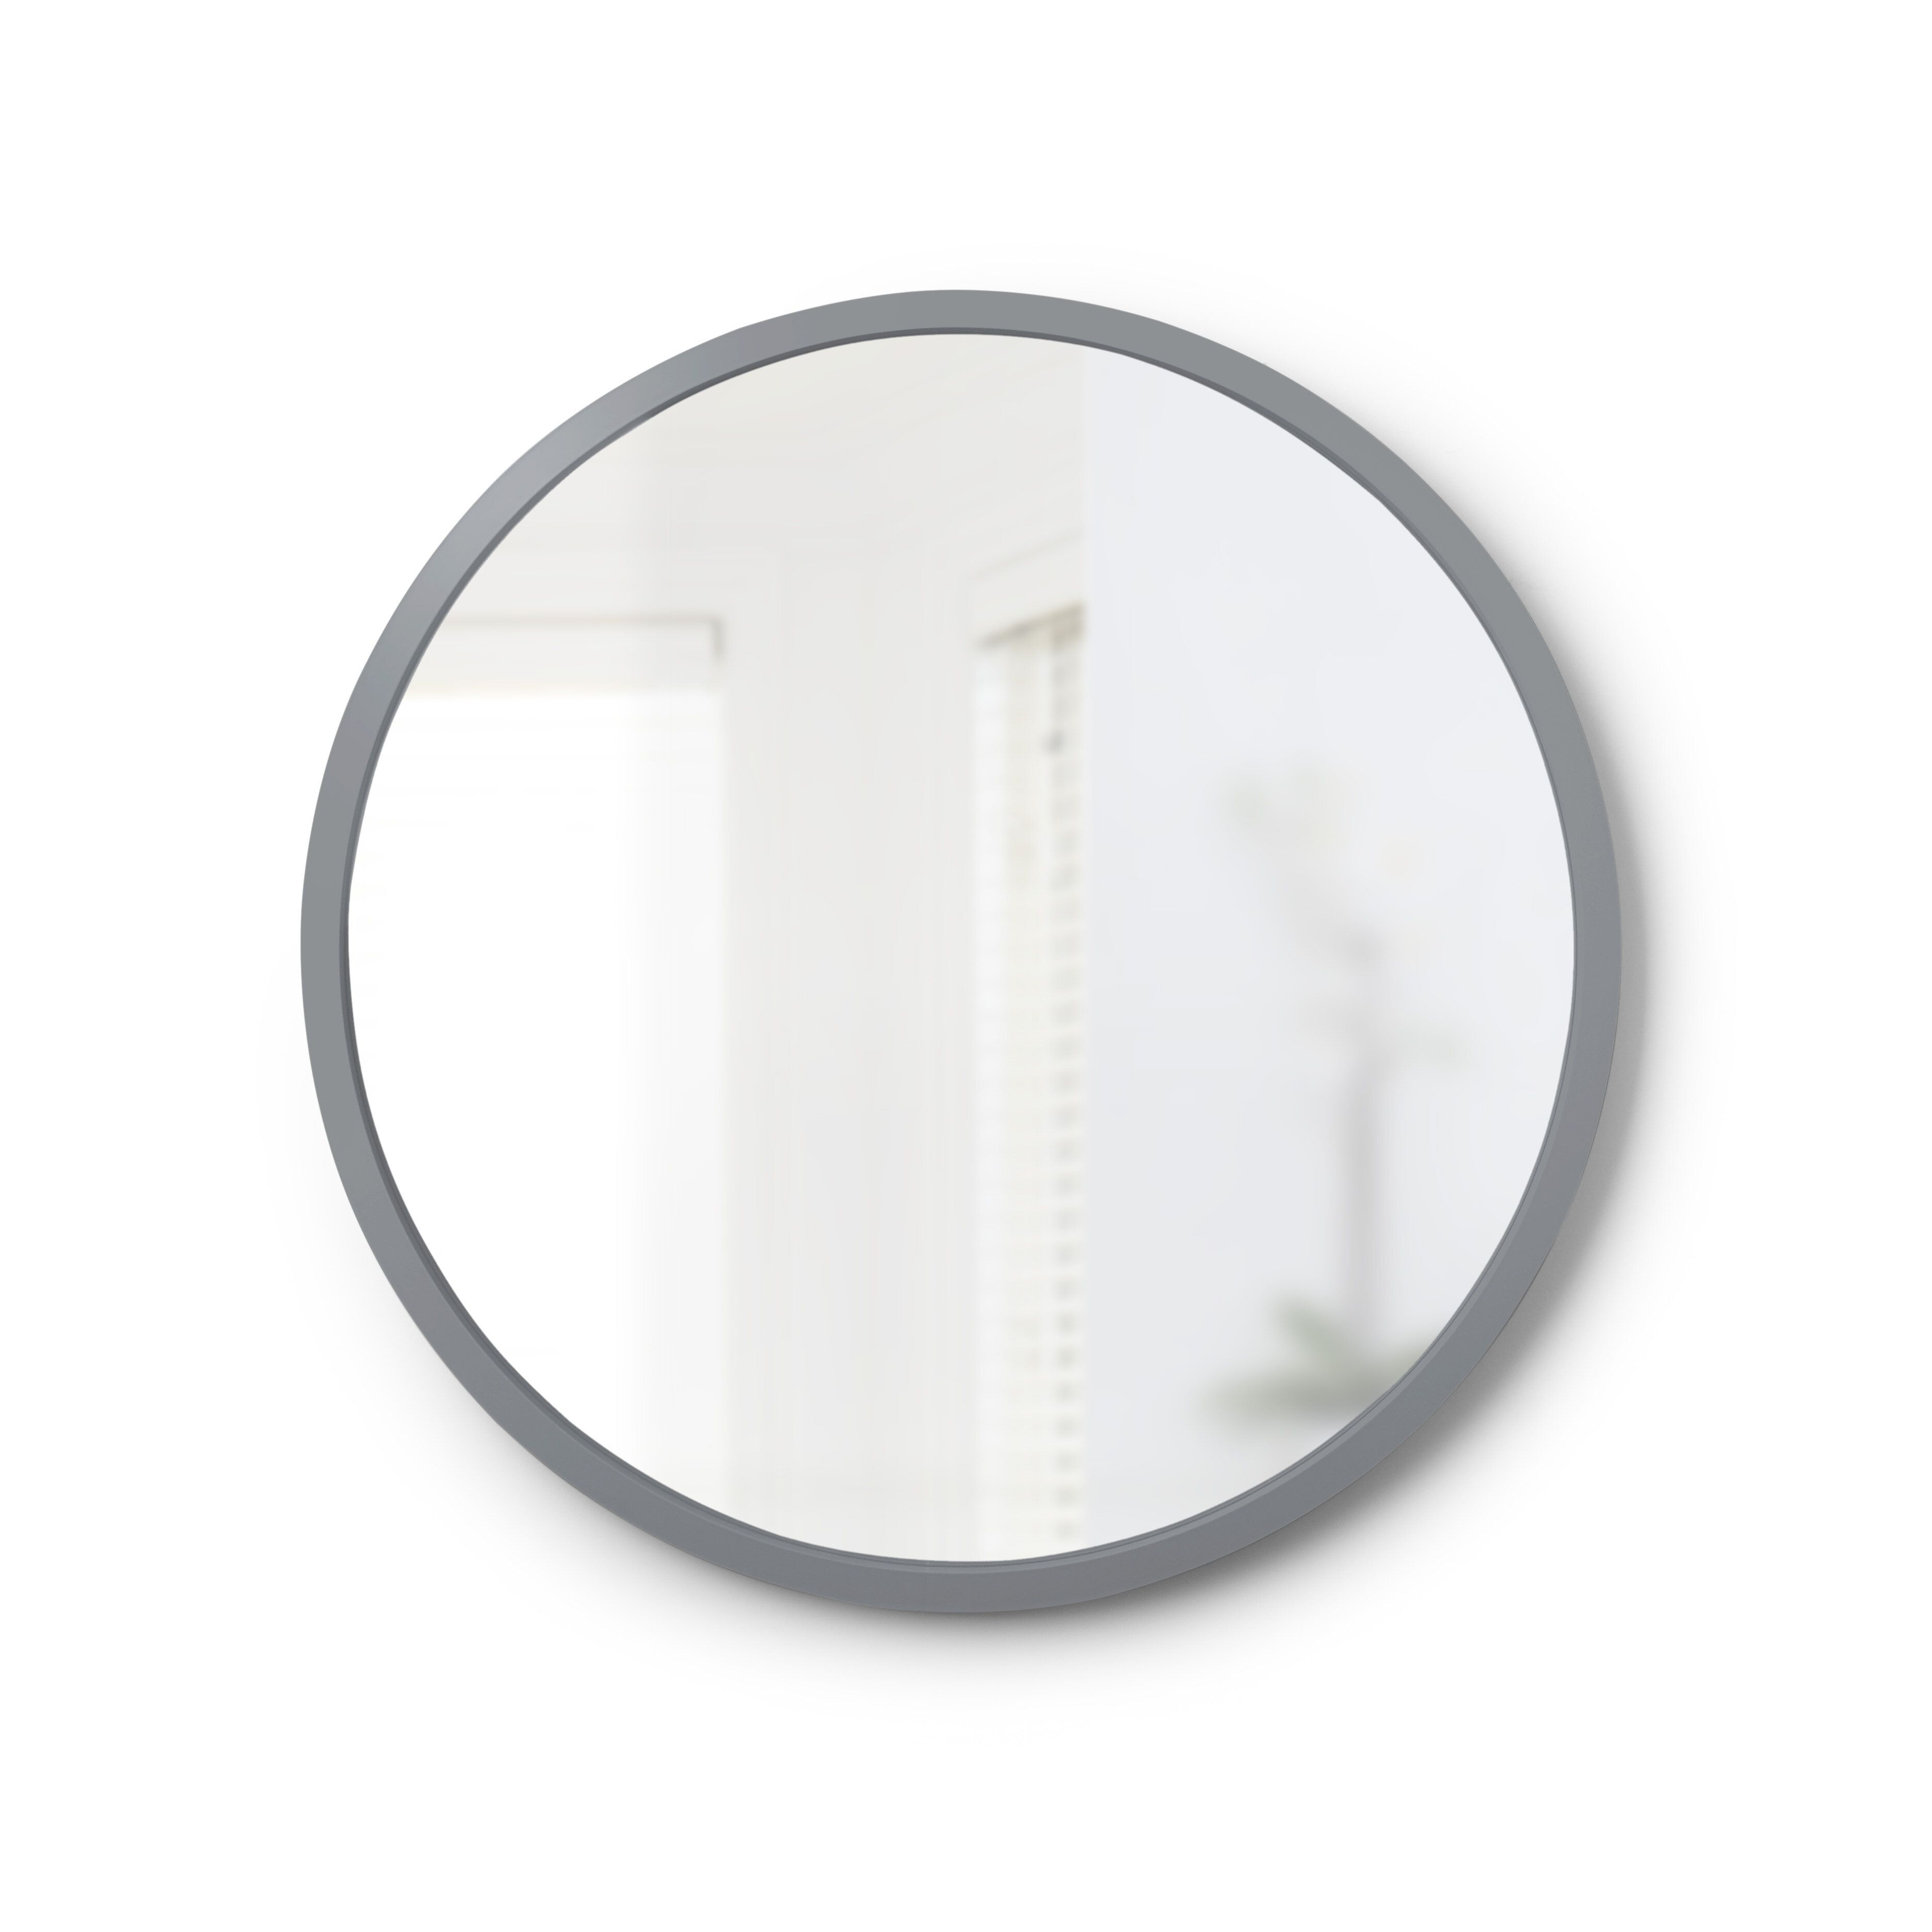 Hub Modern And Contemporary Accent Mirror Pertaining To Levan Modern & Contemporary Accent Mirrors (View 5 of 20)